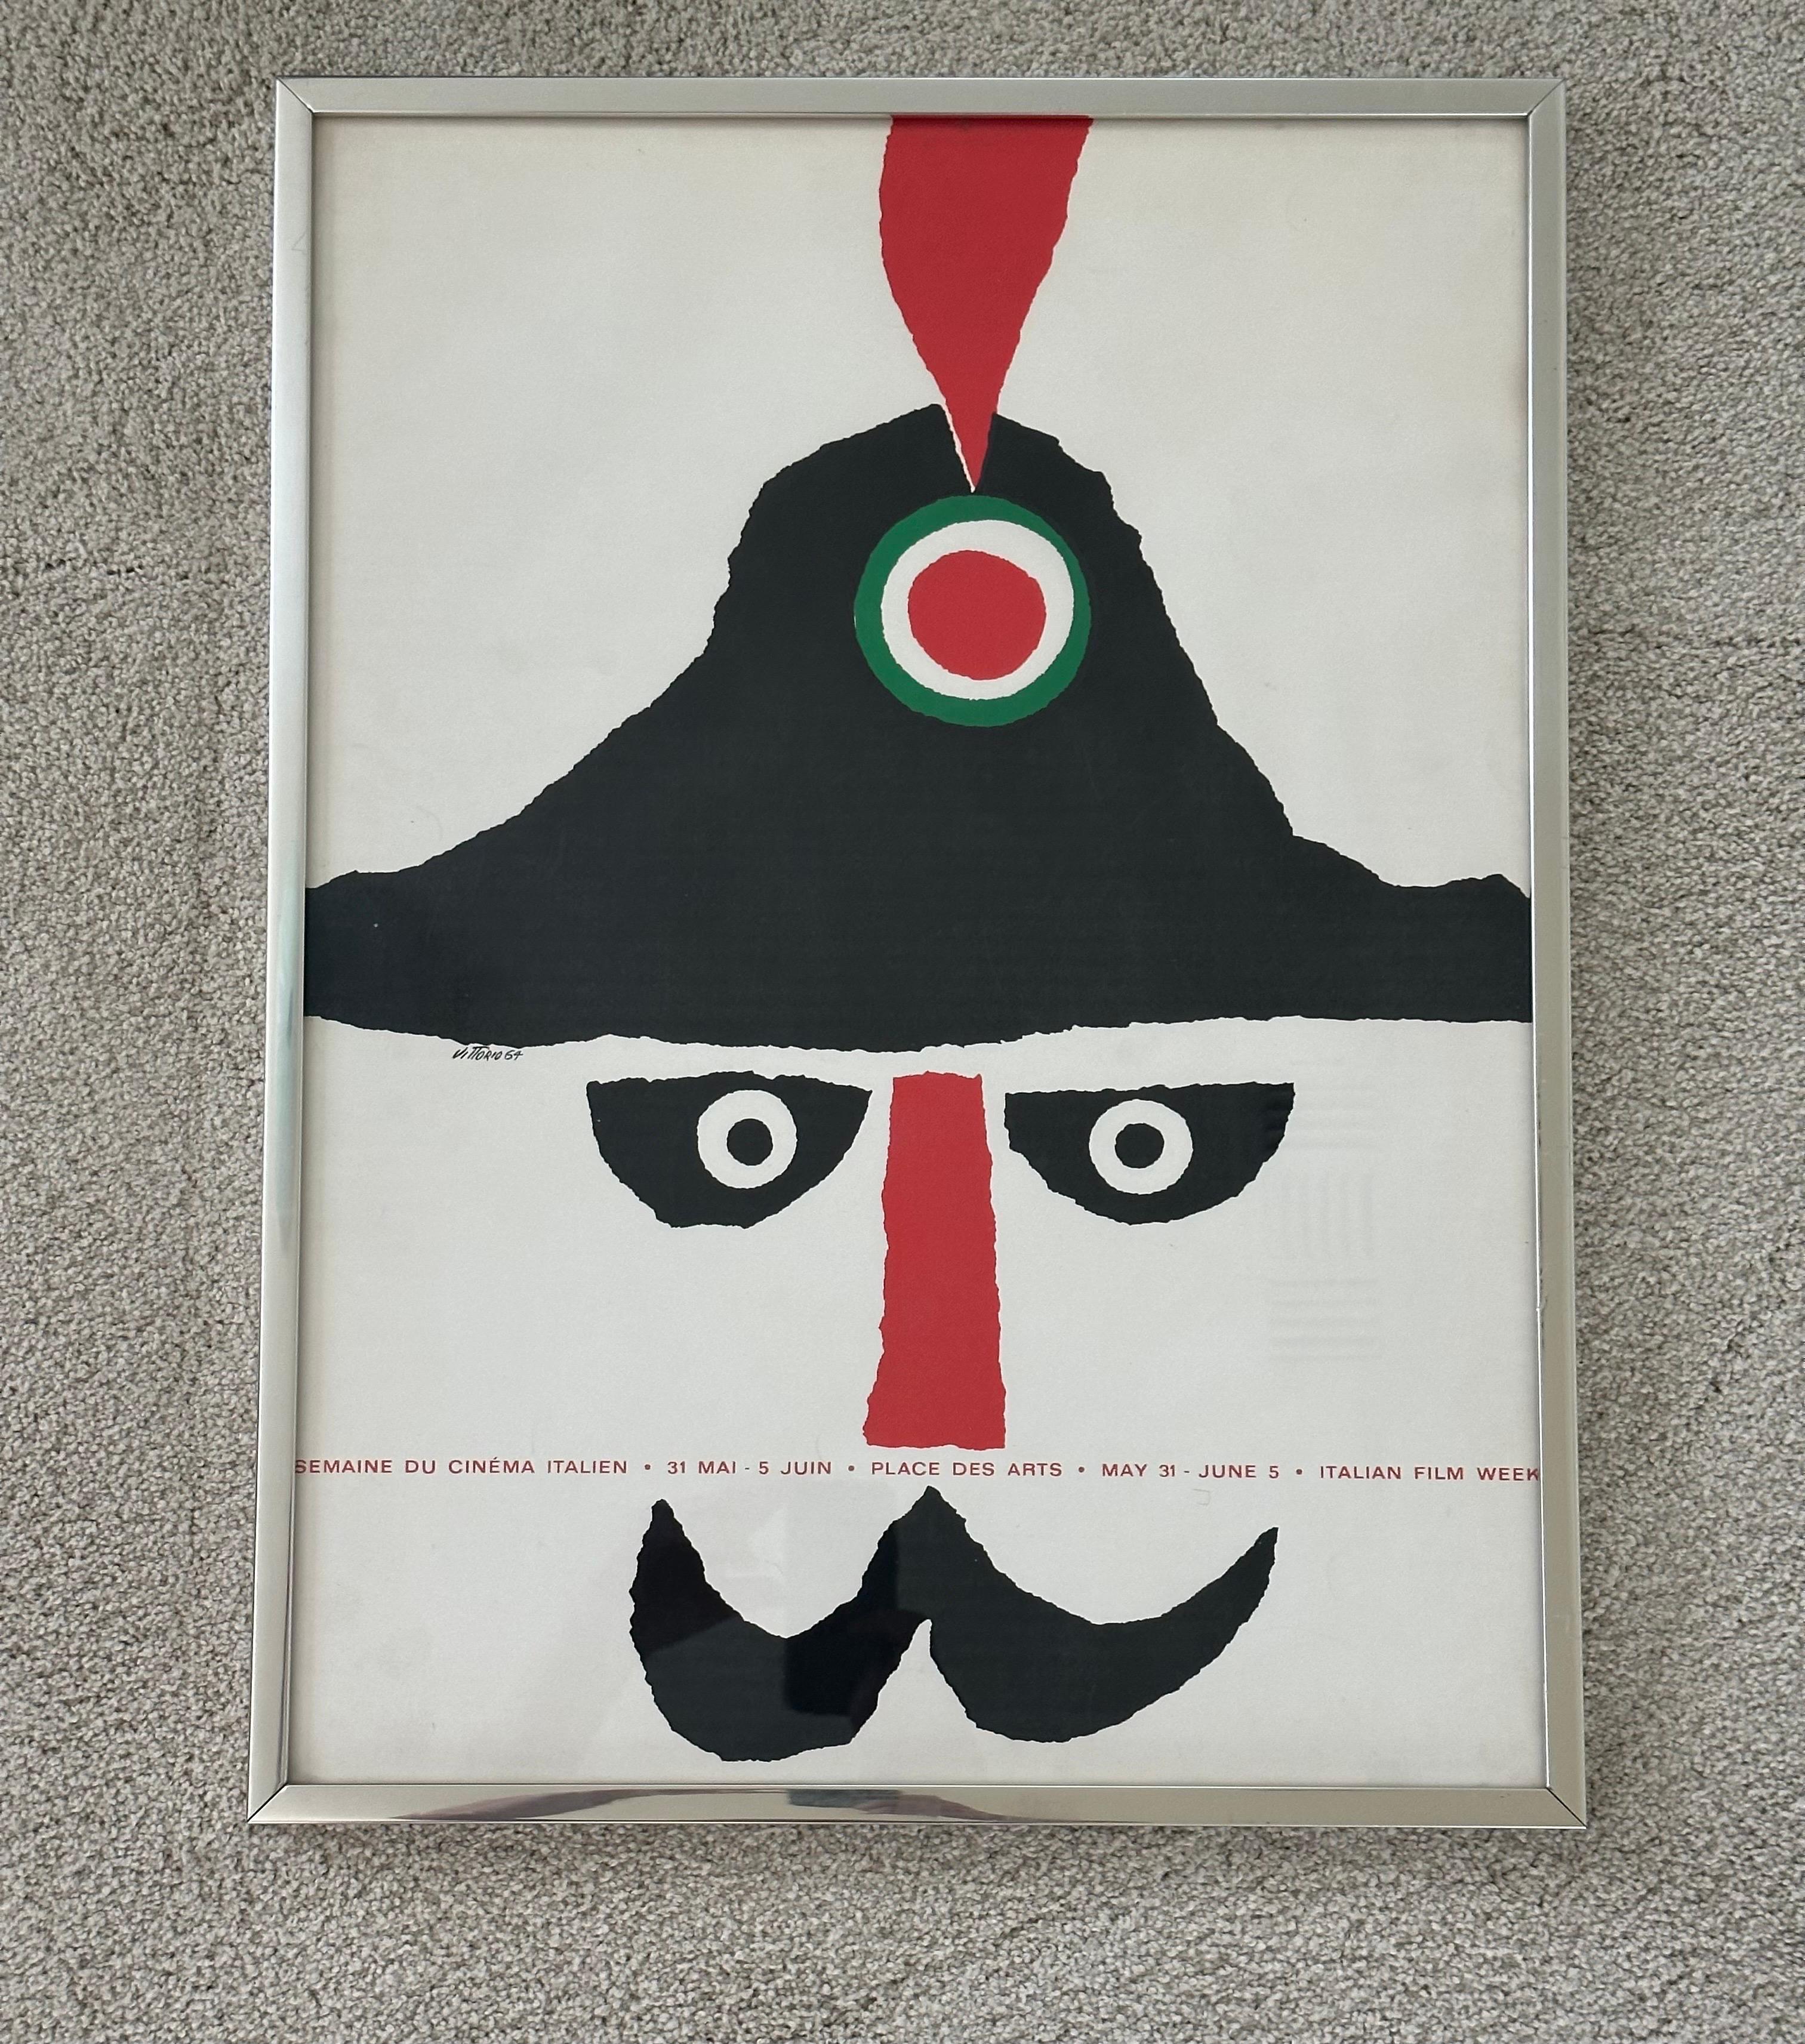 Original Vintage Canadian Film Festival Movie Poster by Vittorio Fiorucci In Good Condition For Sale In San Diego, CA